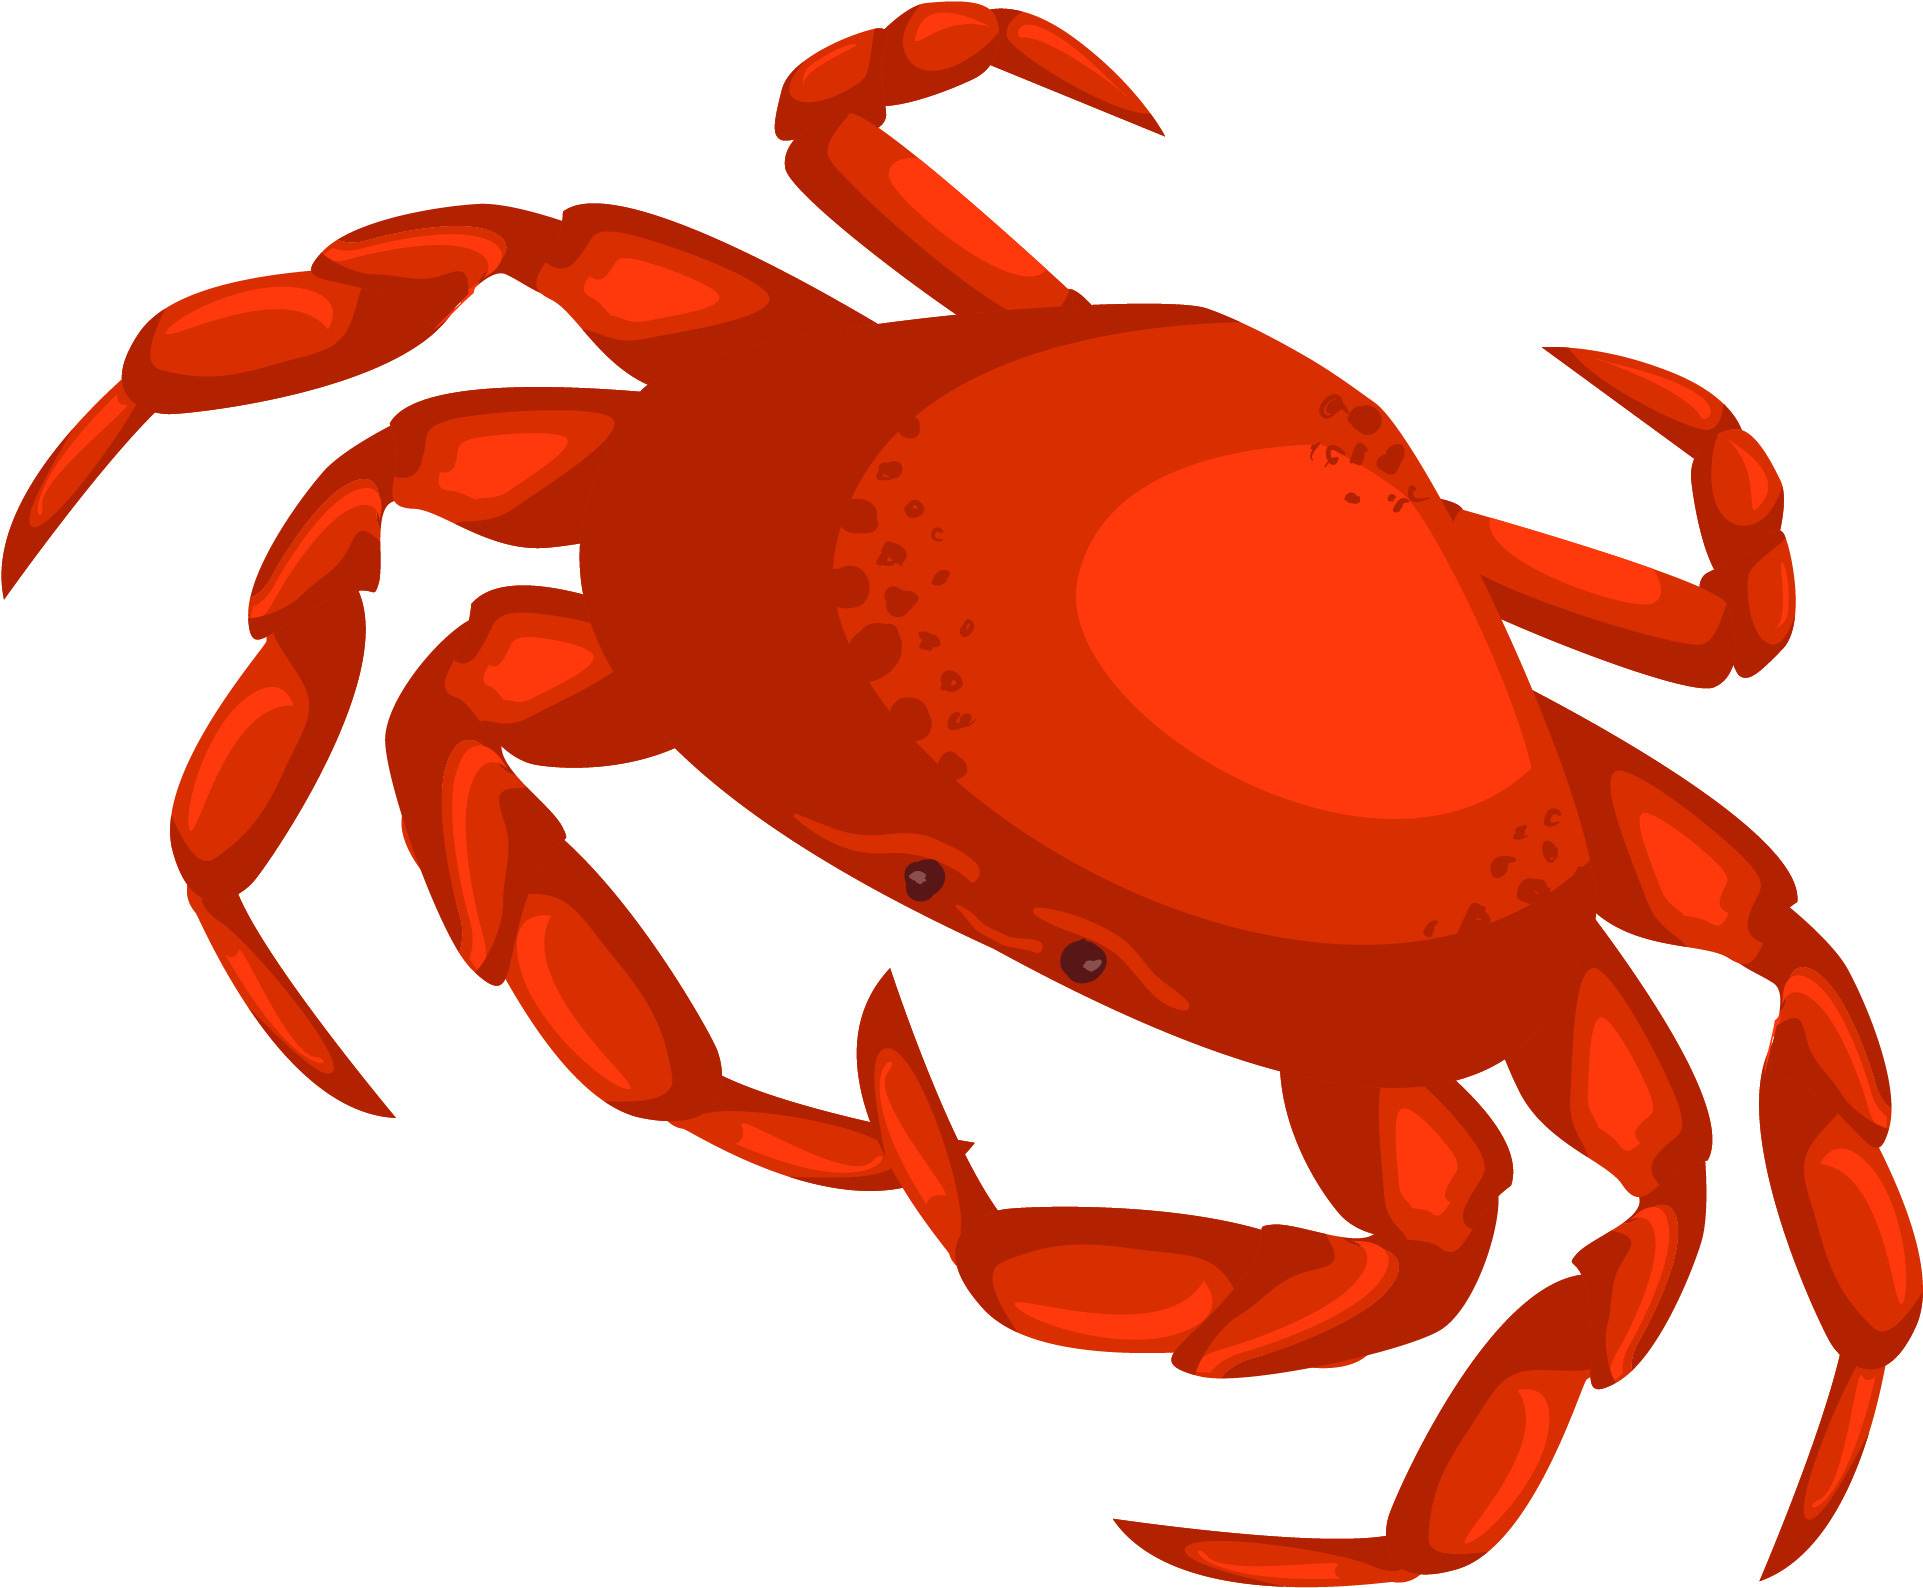 Red Crab PNG HD Images